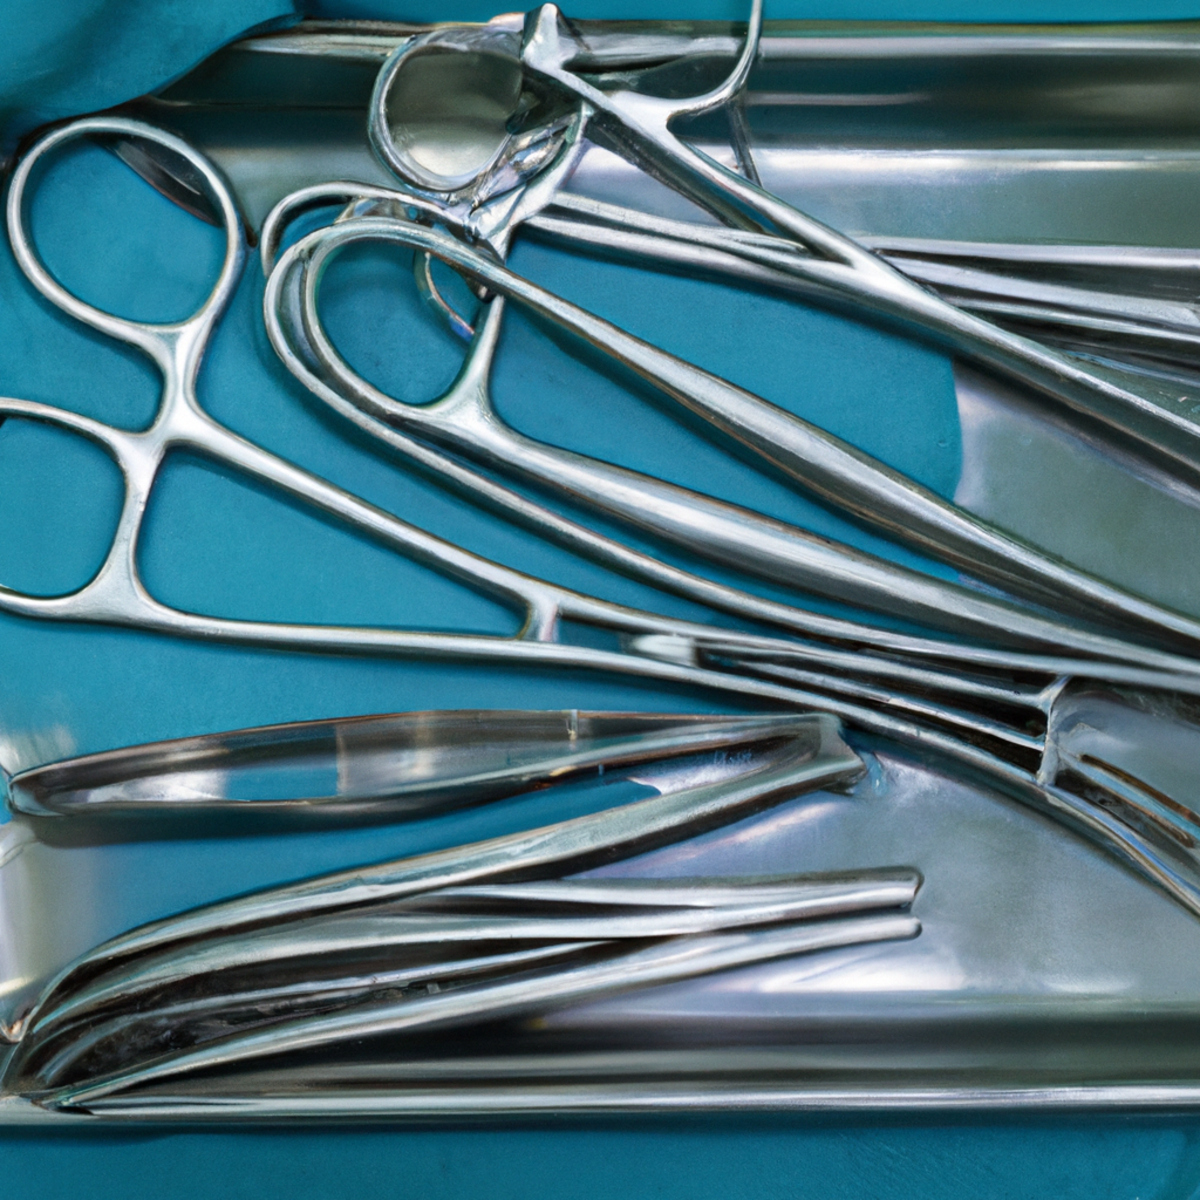 Sterile surgical tray with gleaming stainless steel instruments, showcasing precision and expertise in the operating room.